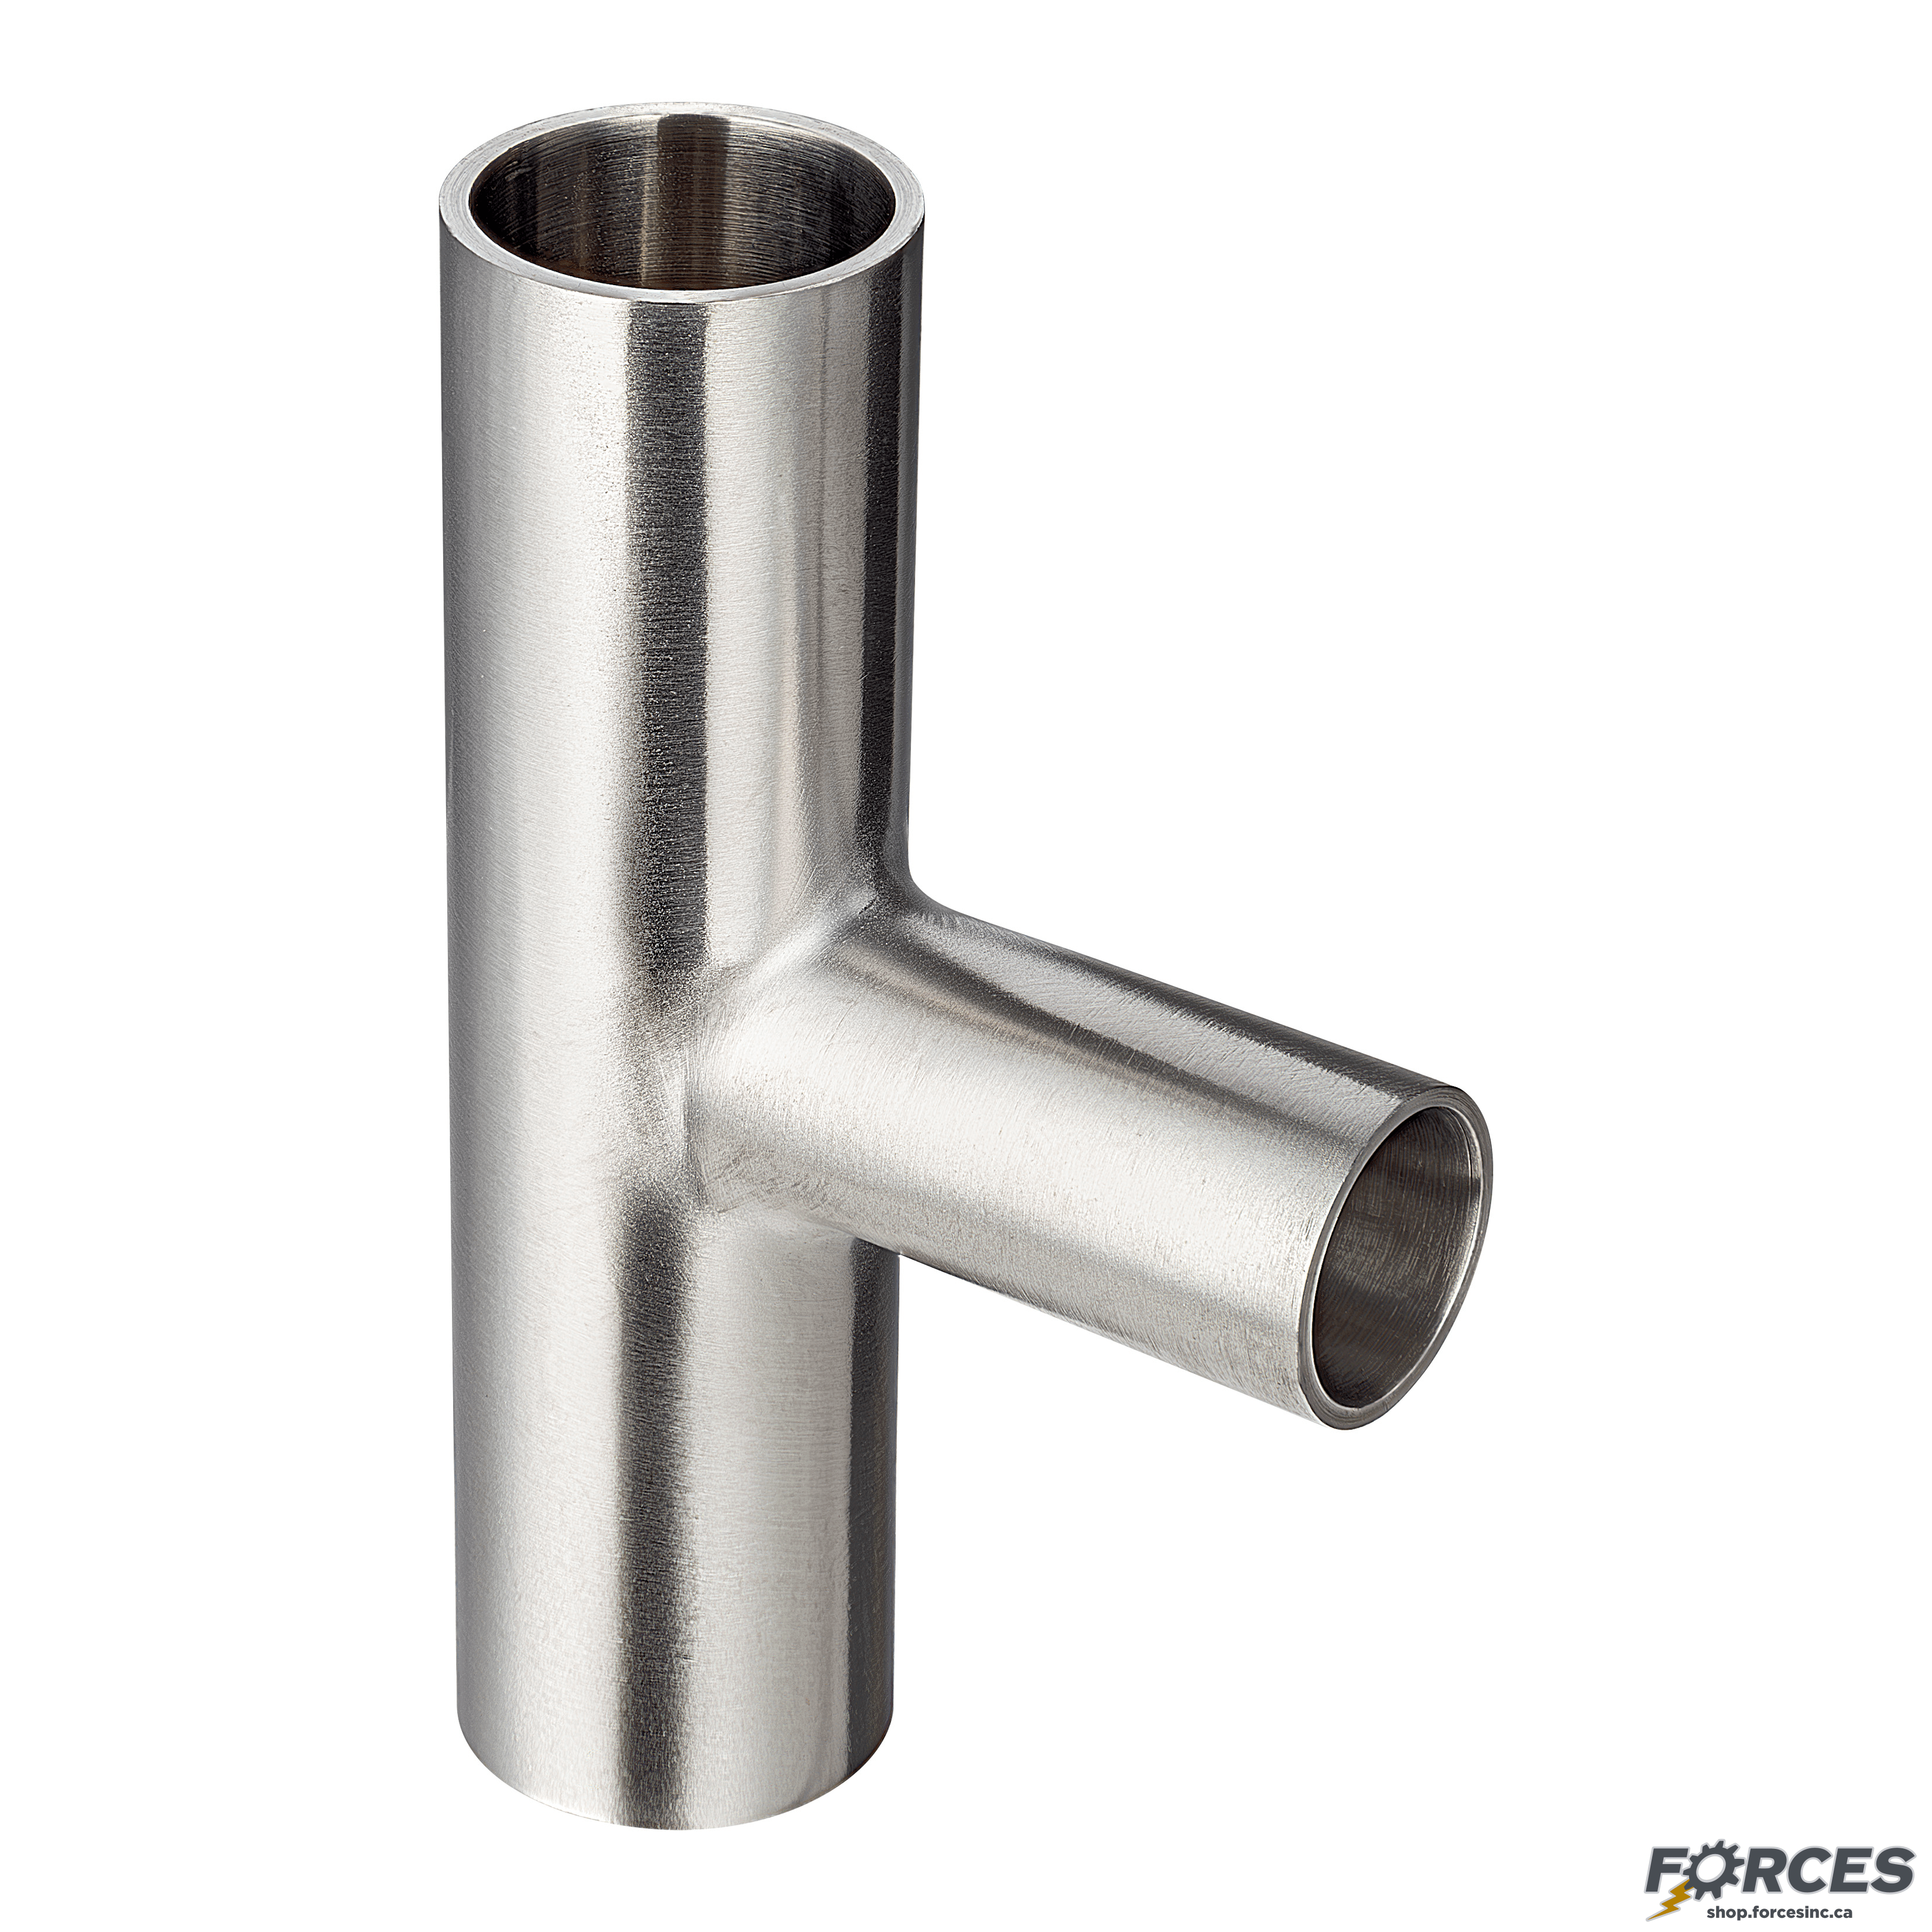 2-1/2" x 2" Butt Weld Tee Reducer - Stainless Steel 316 - Forces Inc